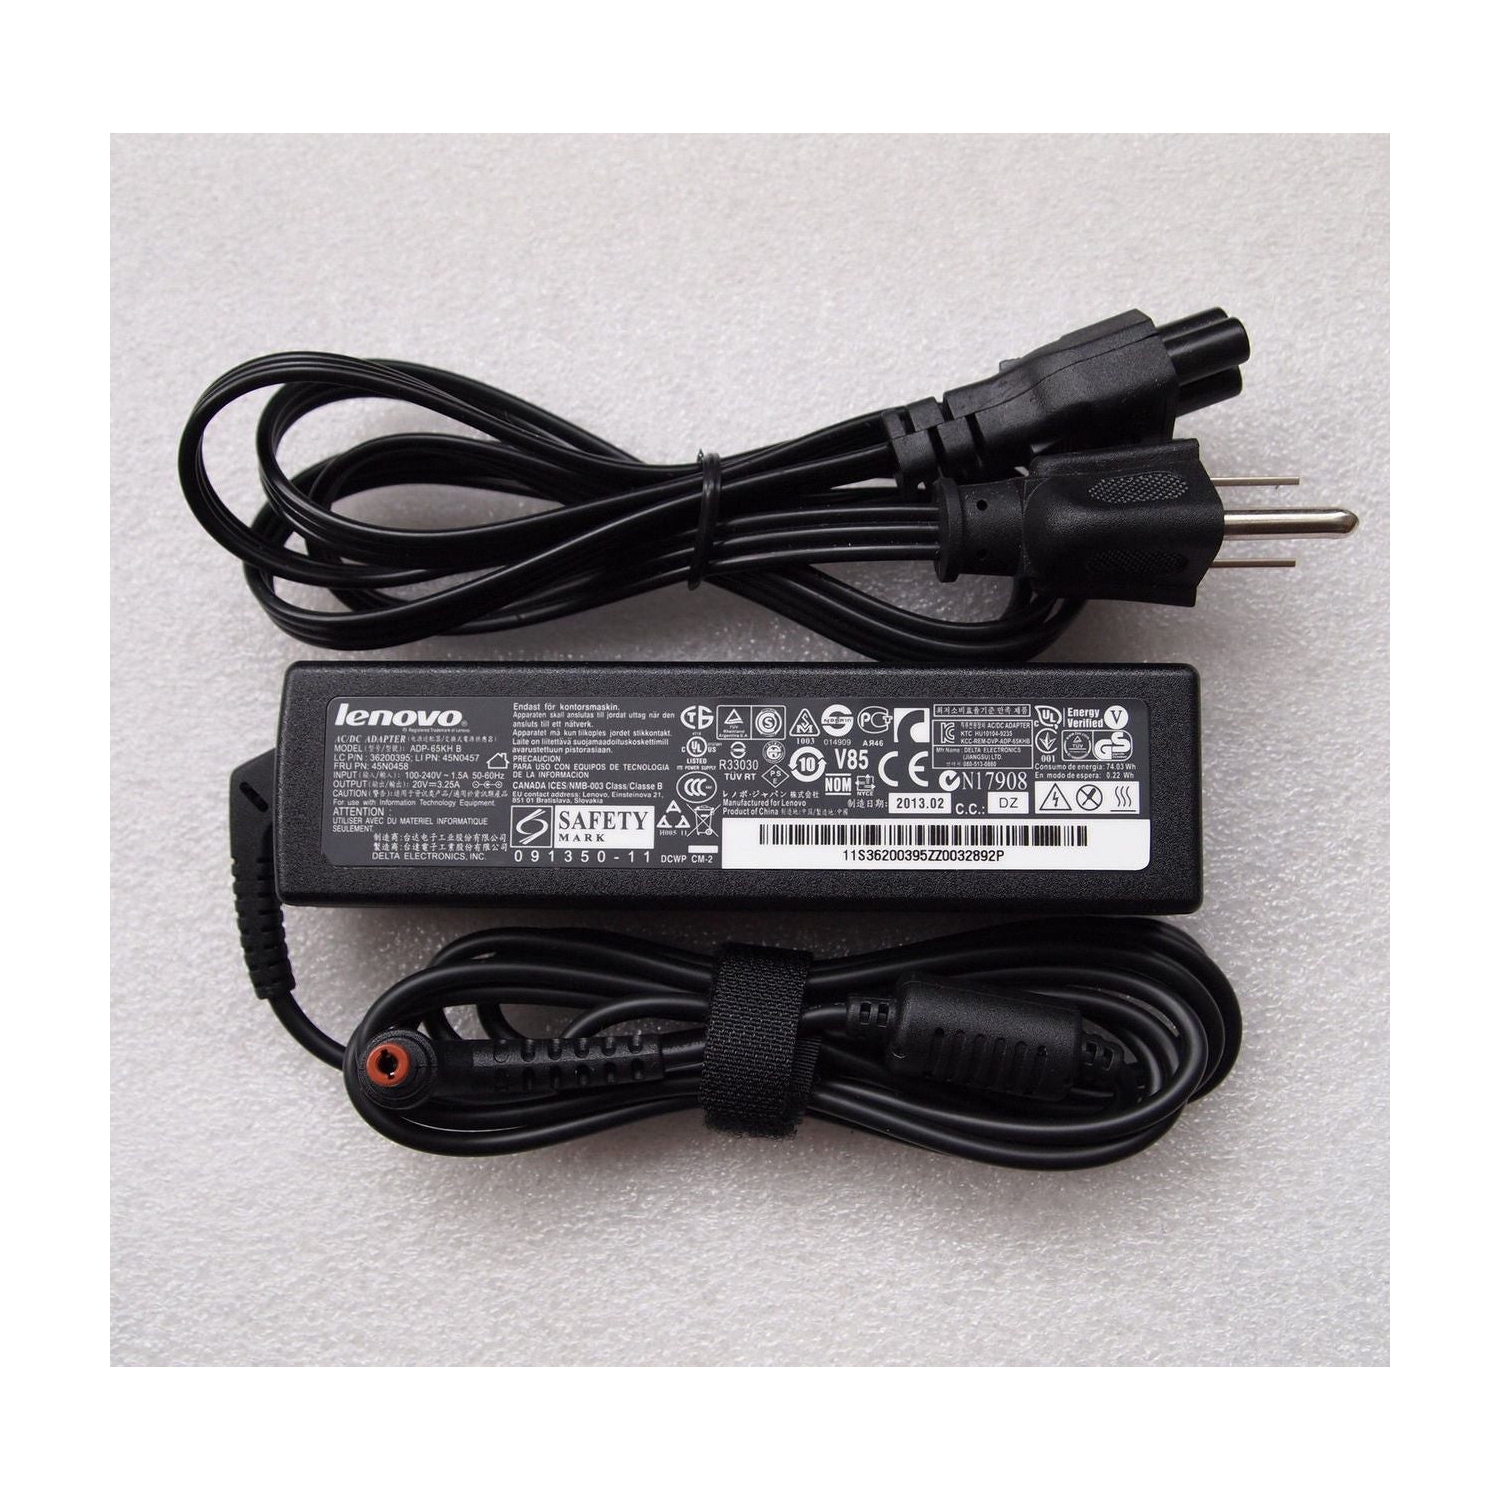 New Genuine Lenovo 3000 Series C100 C200 N100 N200 AC Power Adapter Charger 65W